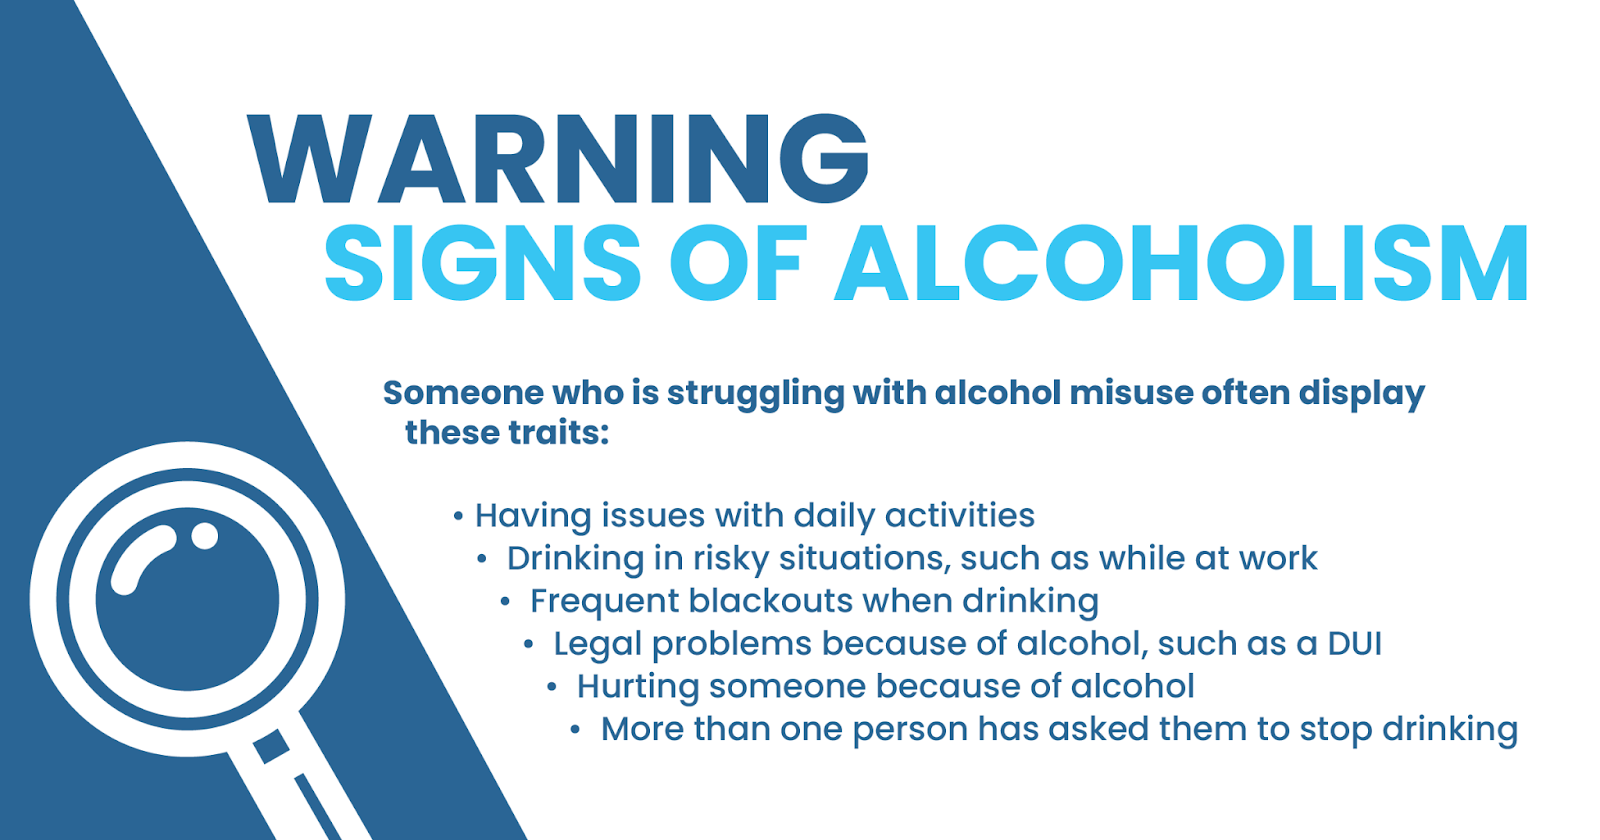 traits that someone suffering from alcohol use may display Alcoholism alcohol rehab drug rehab 